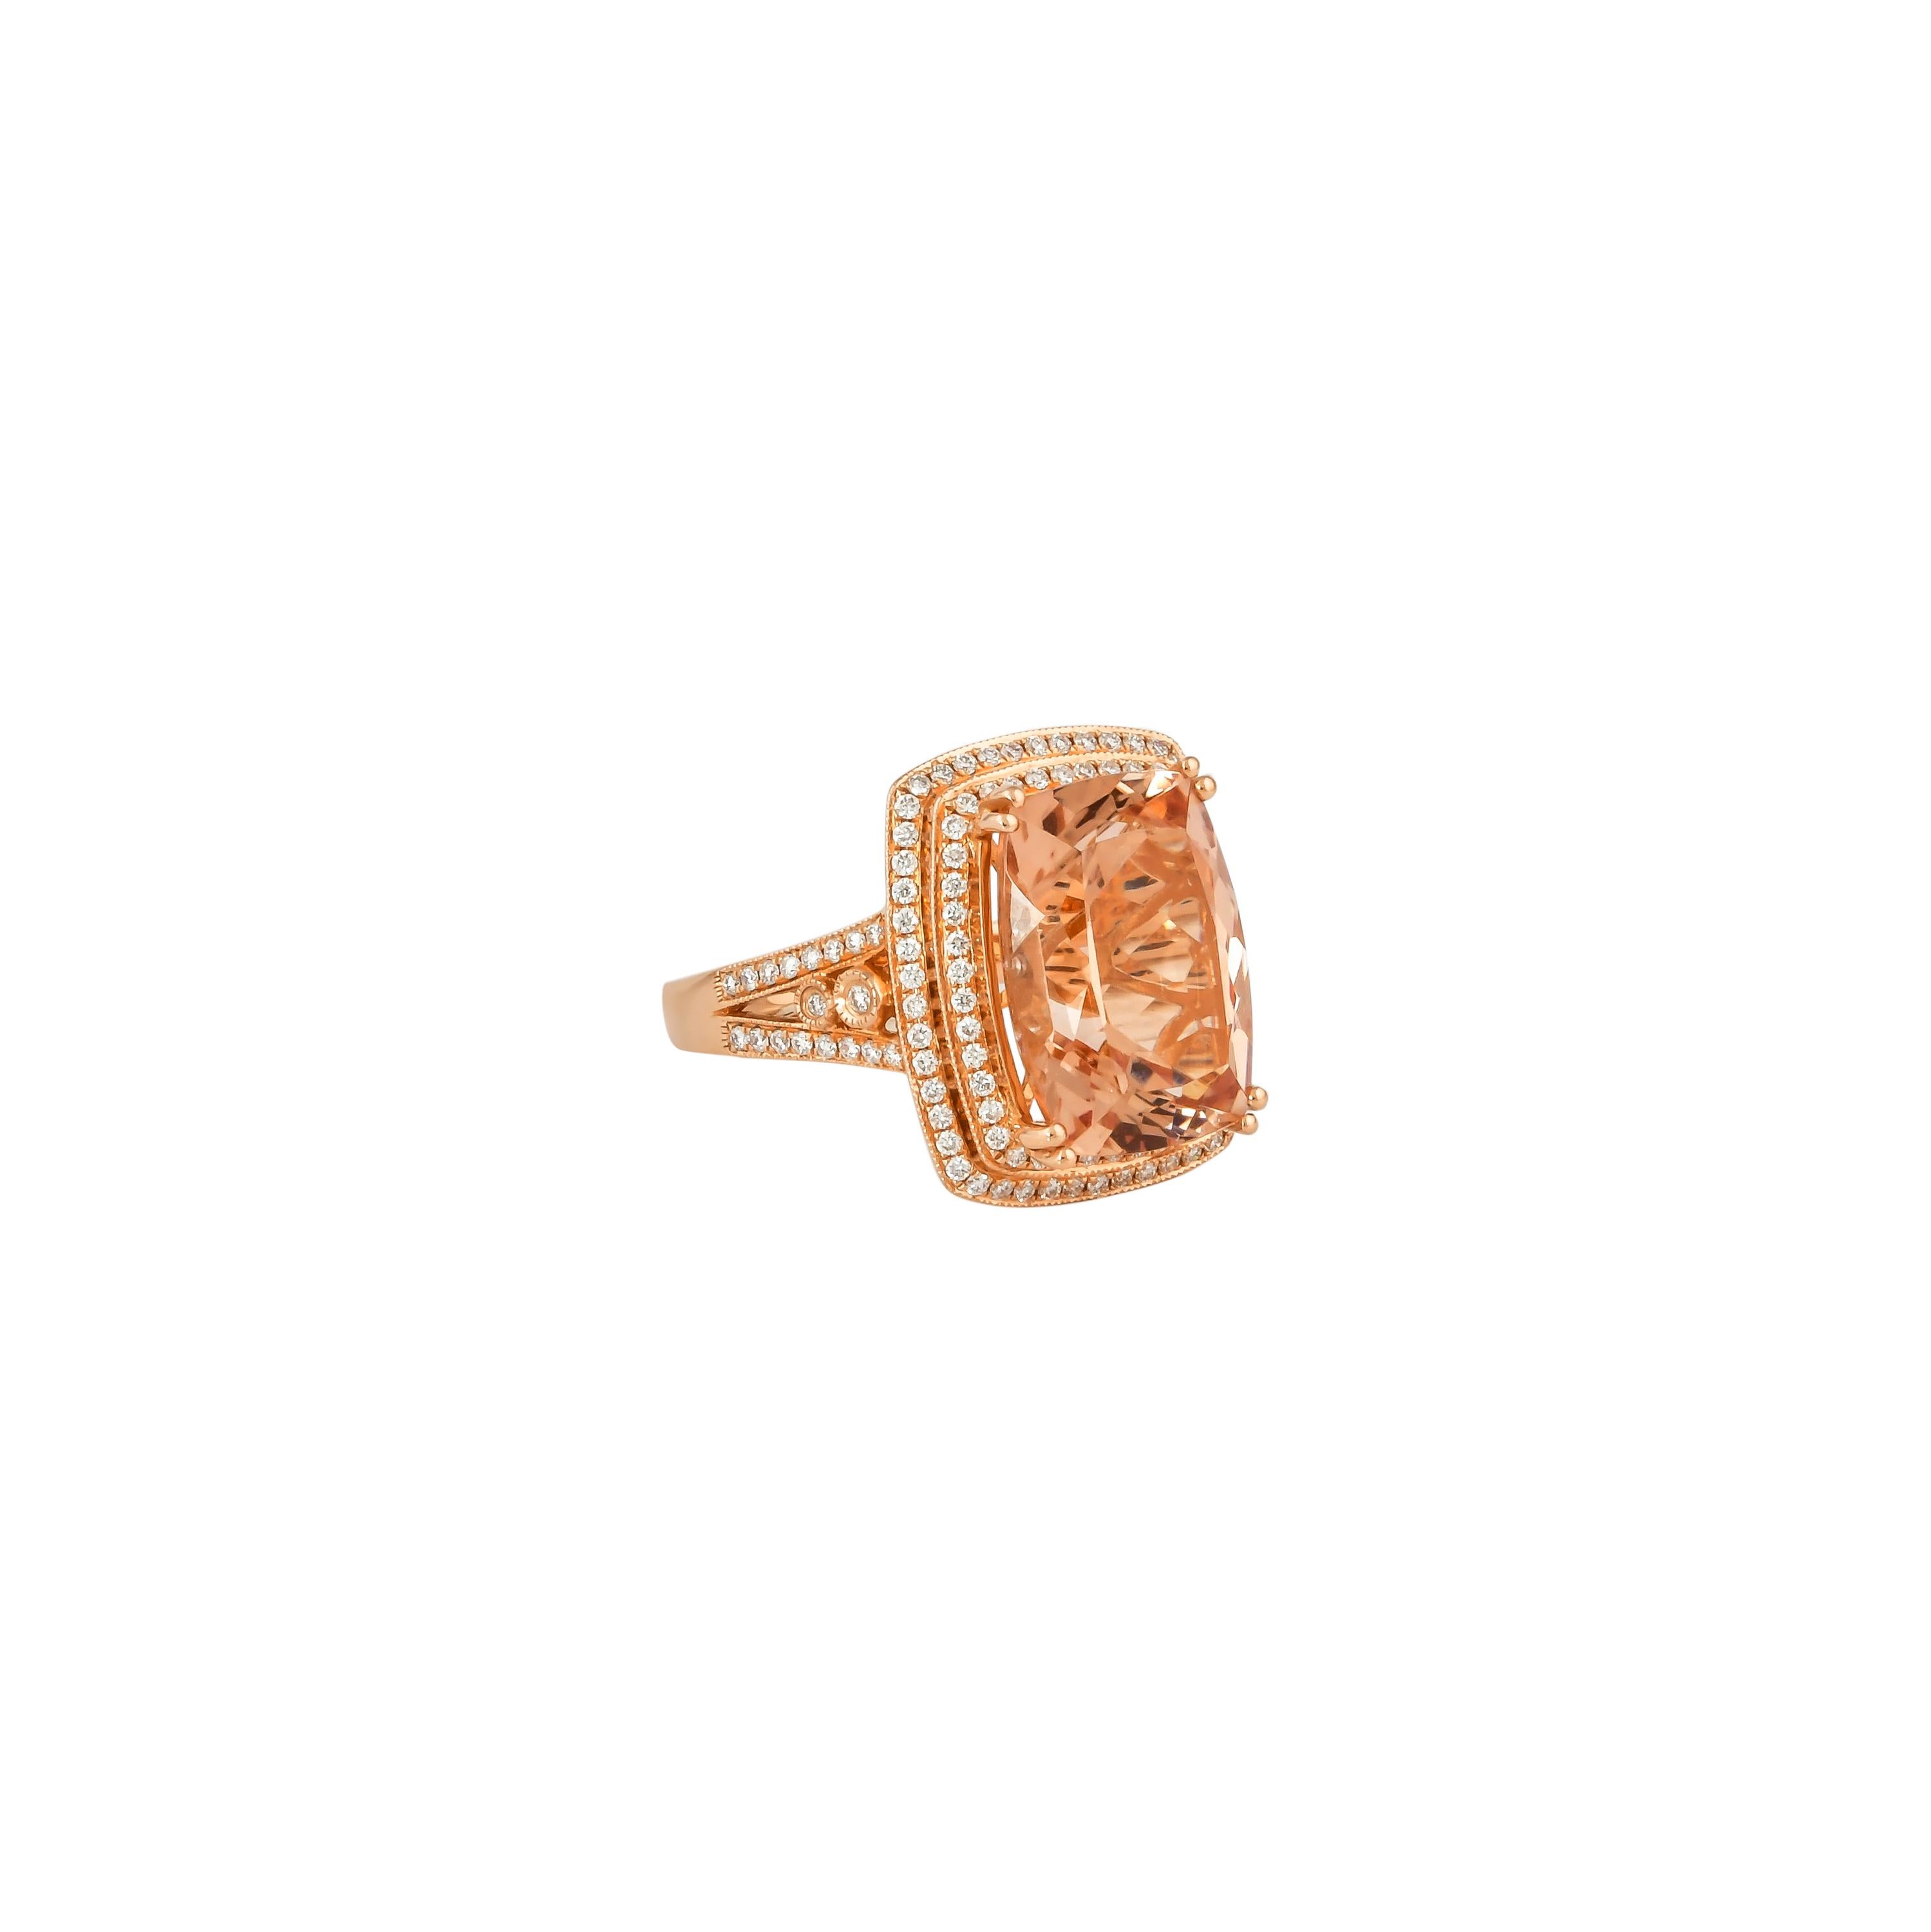 This collection features an array of magnificent morganites! Accented with diamonds these rings are made in rose gold and present a classic yet elegant look. 

Classic morganite ring in 18K rose gold with diamonds. 

Morganite: 6.91 carat cushion